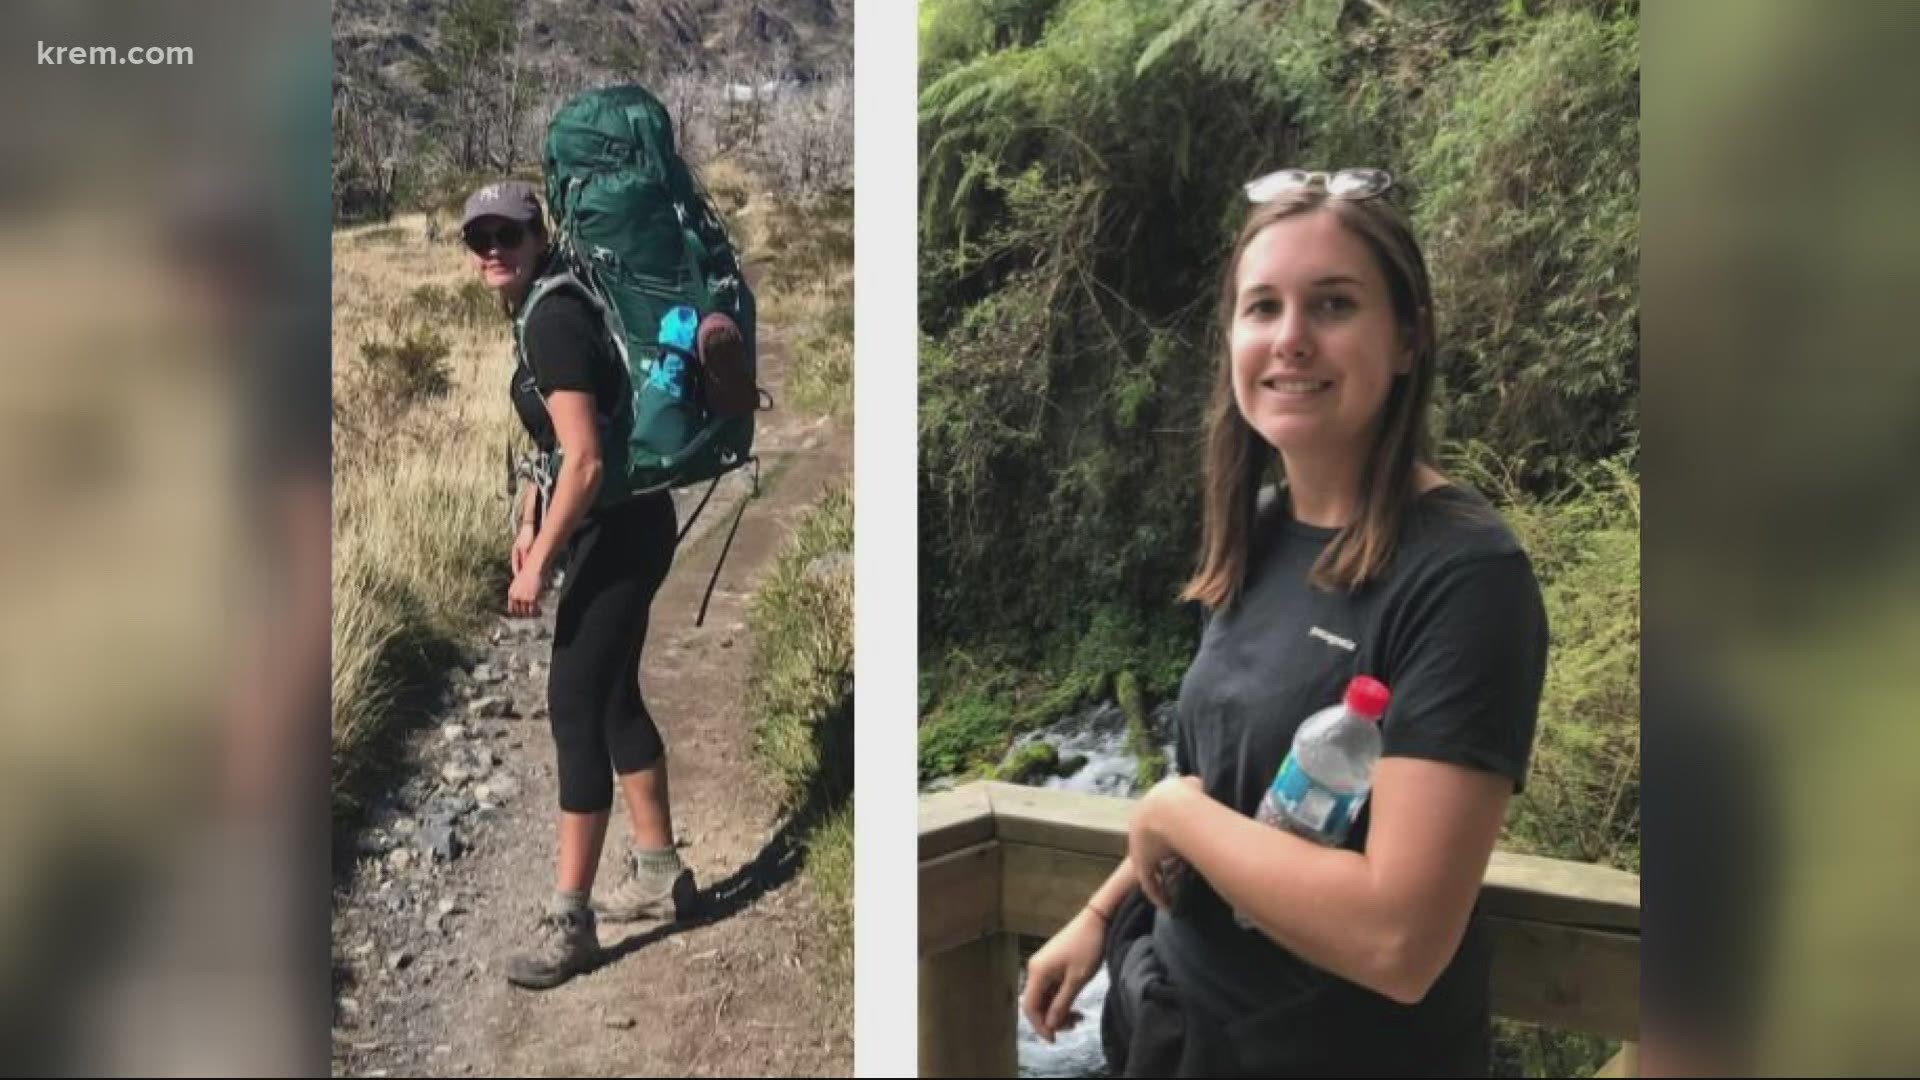 Tatum Morell, a graduate student at Montana State University, was attempting to climb five peaks in five days.